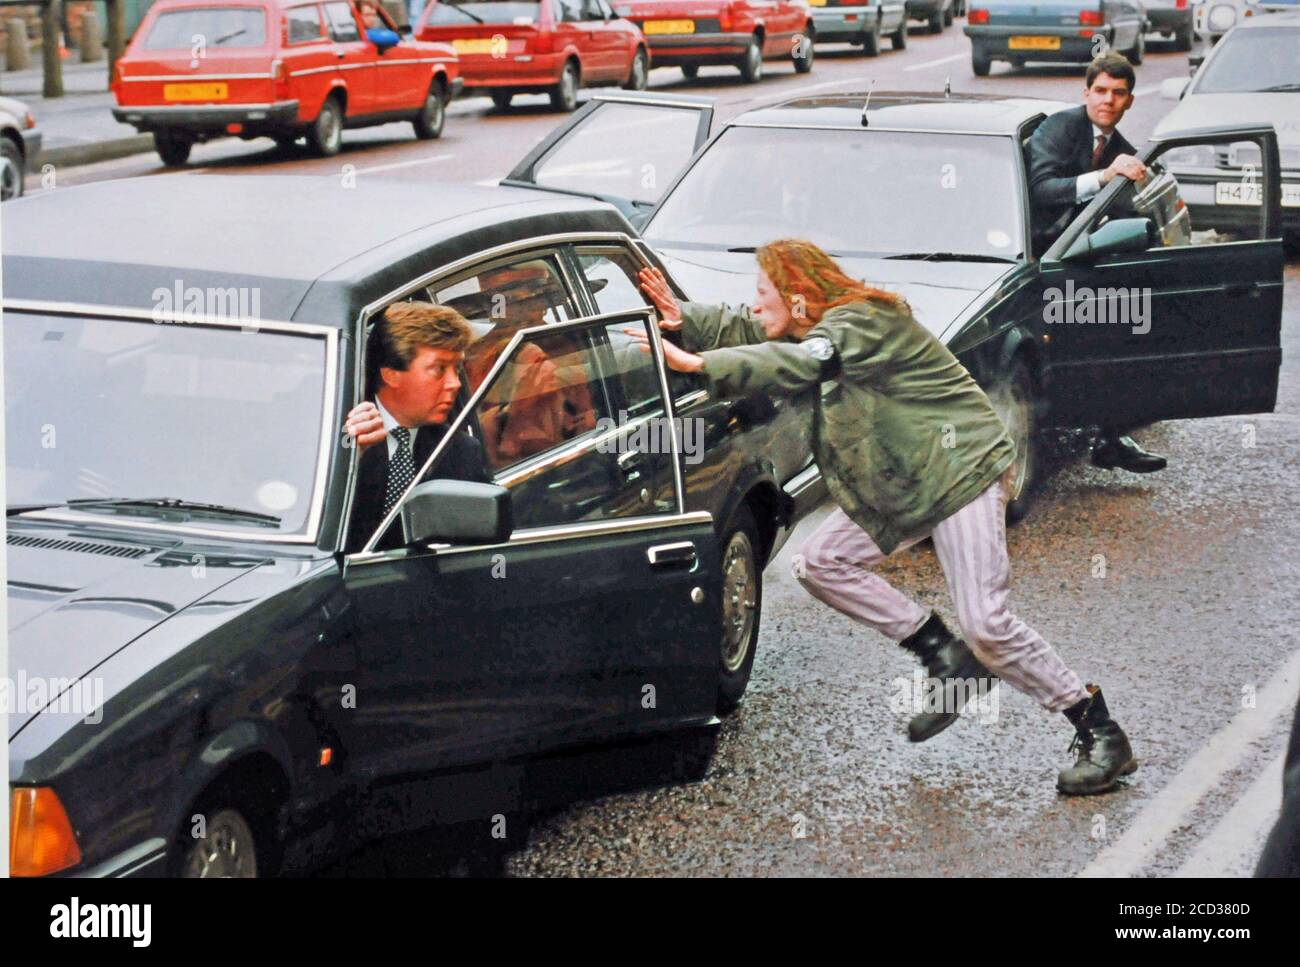 April 30th 1992 / Peter Callaghan, a CND supporter attacks the car that Diana Princess of Wales is in the back off. The attack happened when the Princess was arriving at the Barrow shipyard in Cumbria, UK. to launch Britain's first nuclear submarine HMS Vanguard.Diana's security guard Ken Wharf gets out of the car to protect her. Callaghan was later charged with an offence.....Pic by RAY BRADBURY Stock Photo